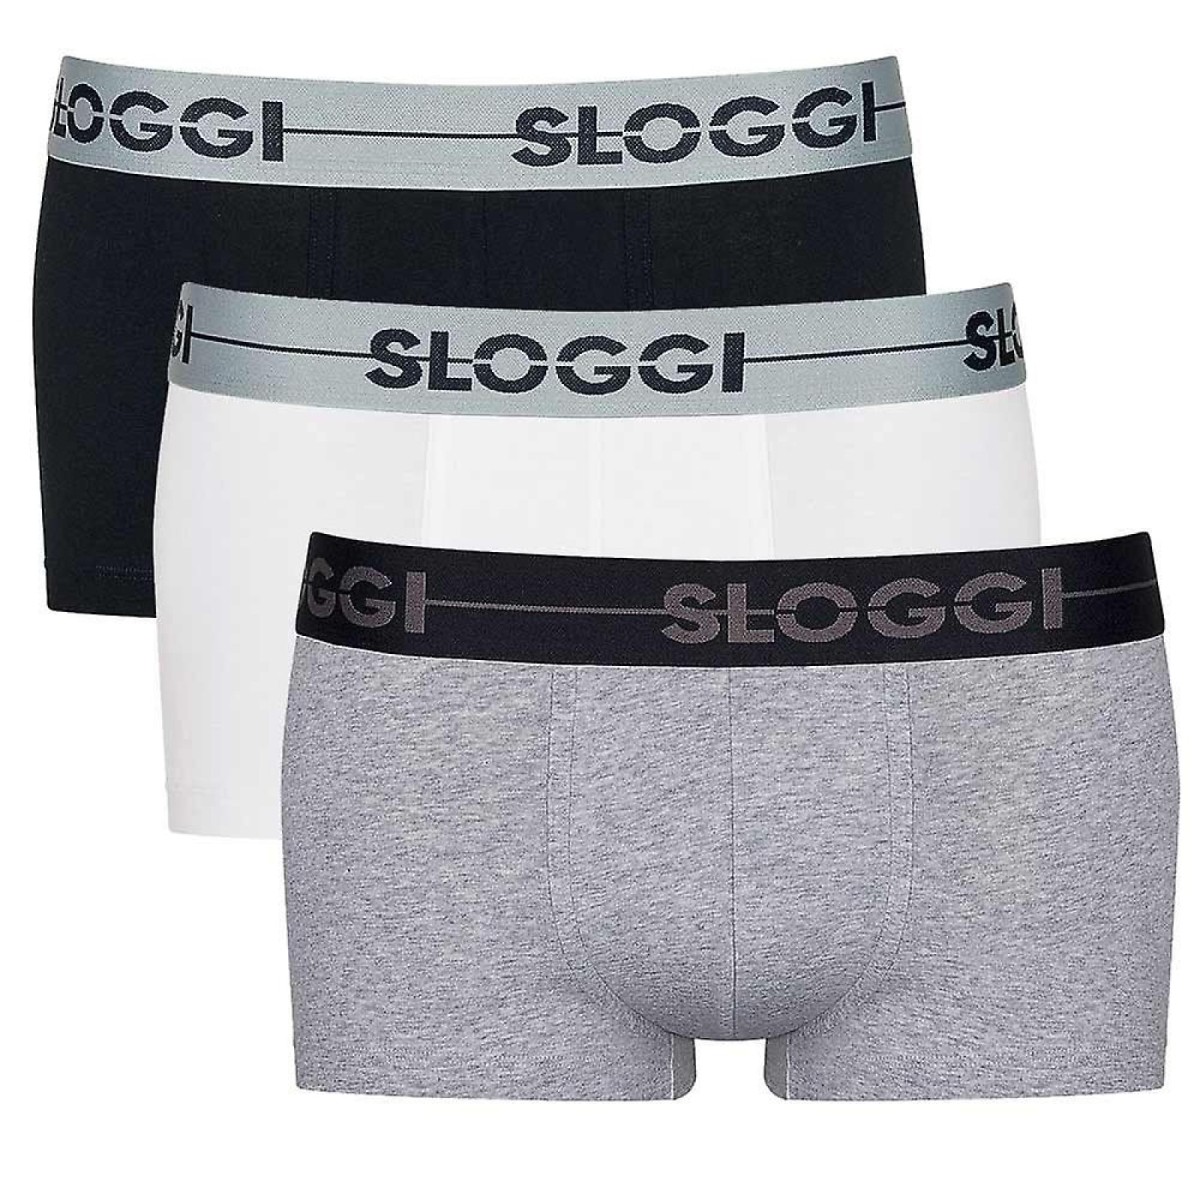 Sloggi Go Hipsters 3Pack Mixed M013 White Black Grey - Simpsons of Cornwall